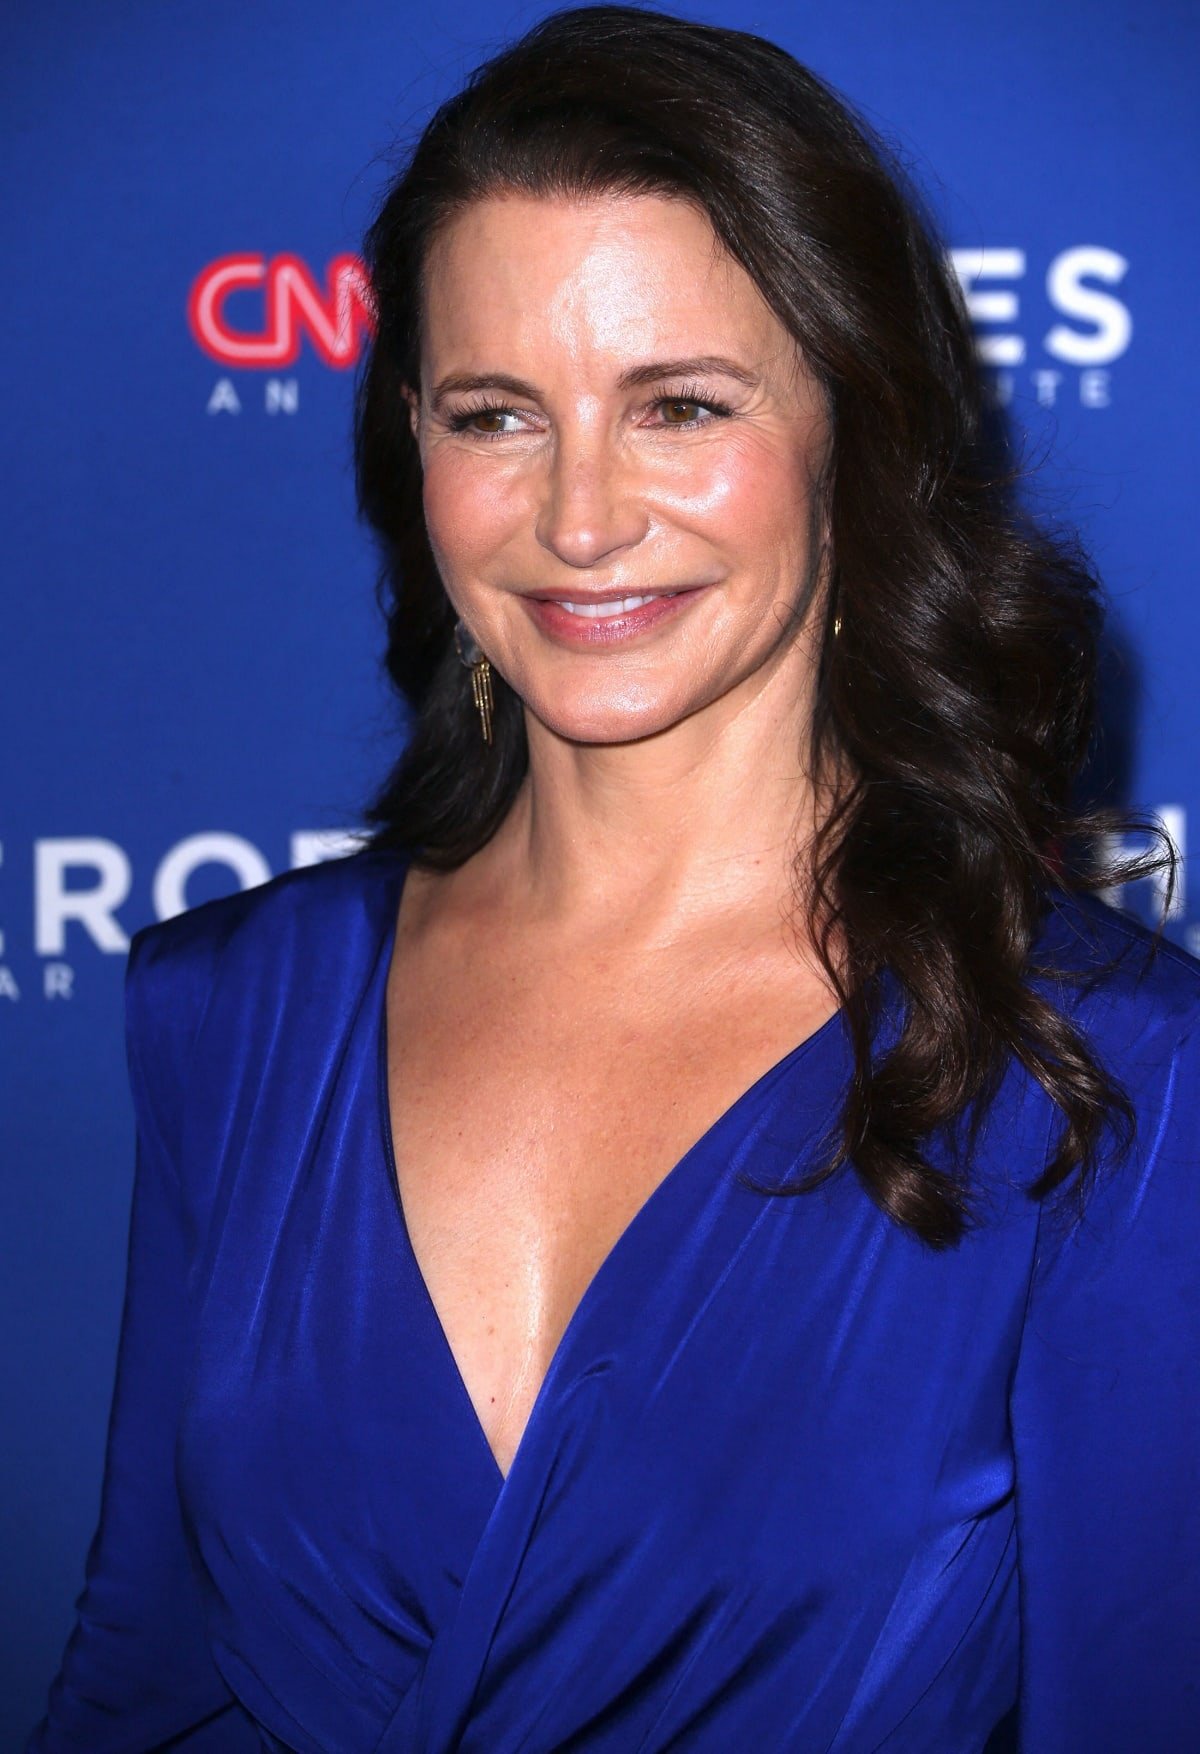 A beautiful and accomplished woman, Kristin Davis is not immune to the pressures of society and Hollywood